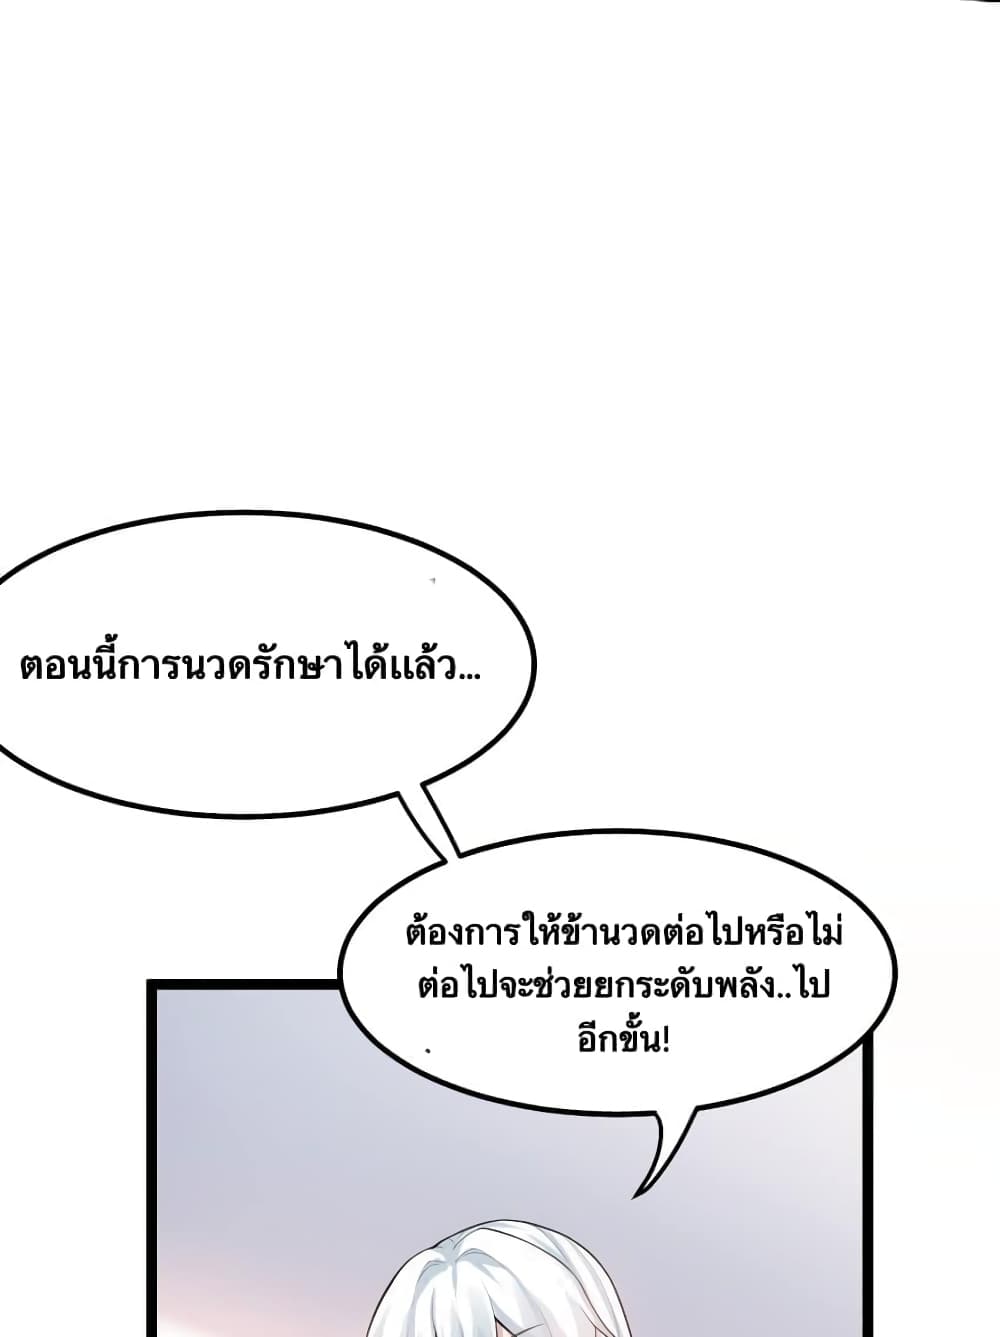 Godsian Masian from Another World ตอนที่ 119 (4)